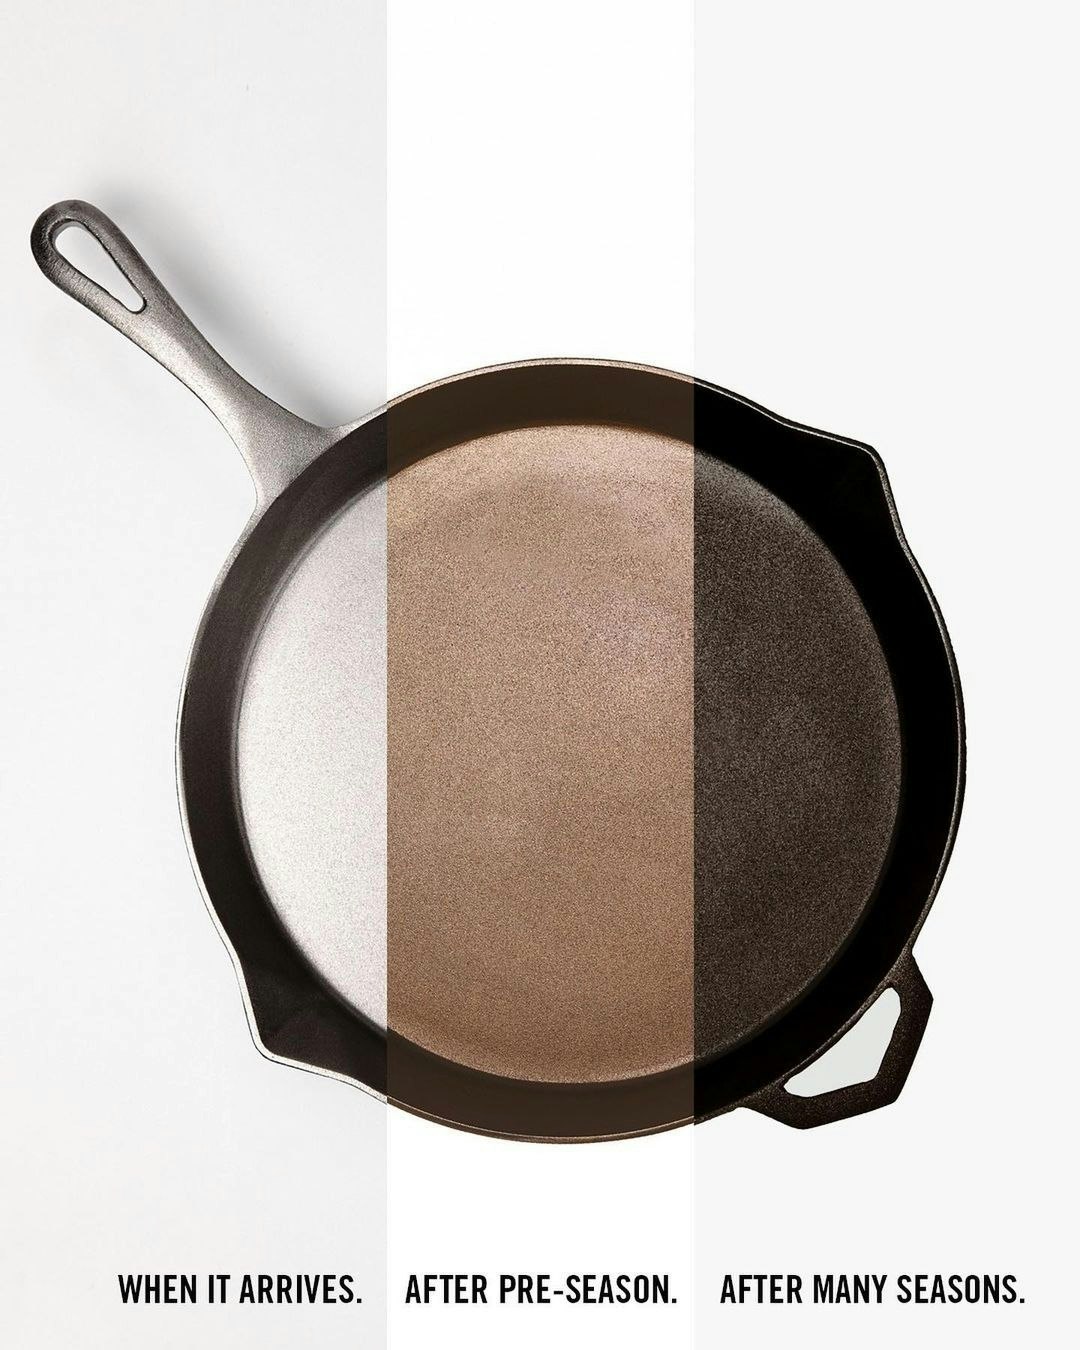 Seasoning Your Cast Iron Pan Isn’t as Hard as You Think...